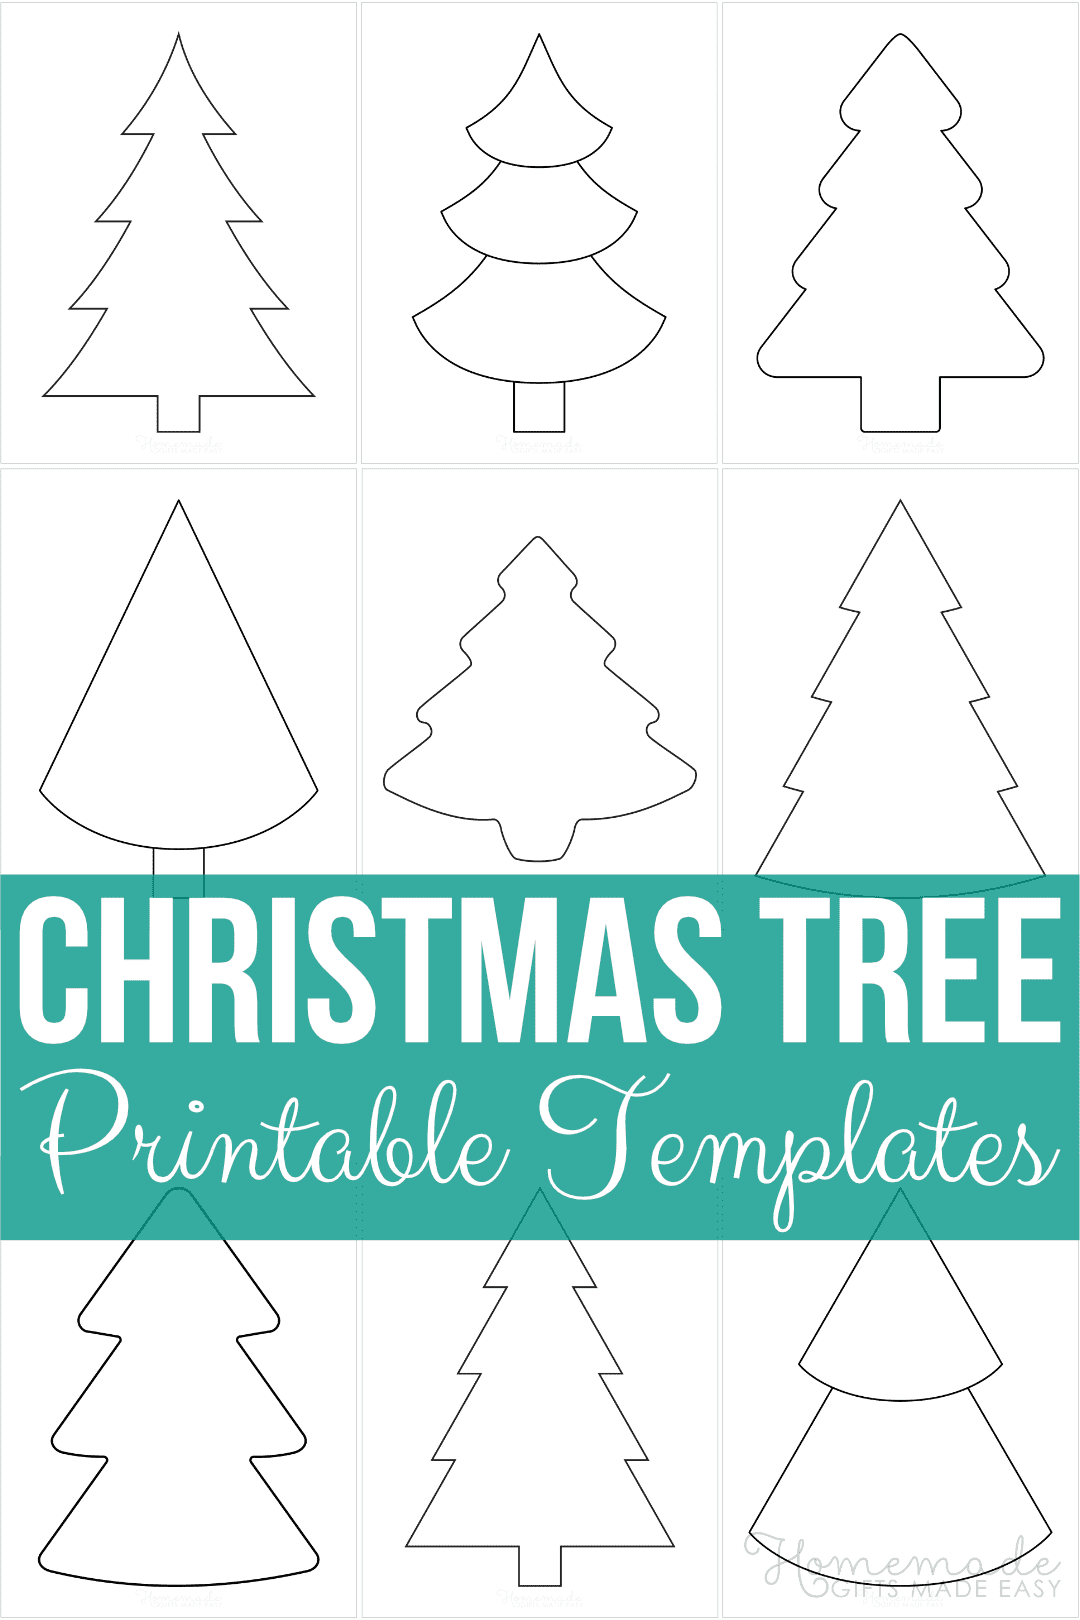 Christmas Tree Templates Free Printable Outlines & Patterns in All